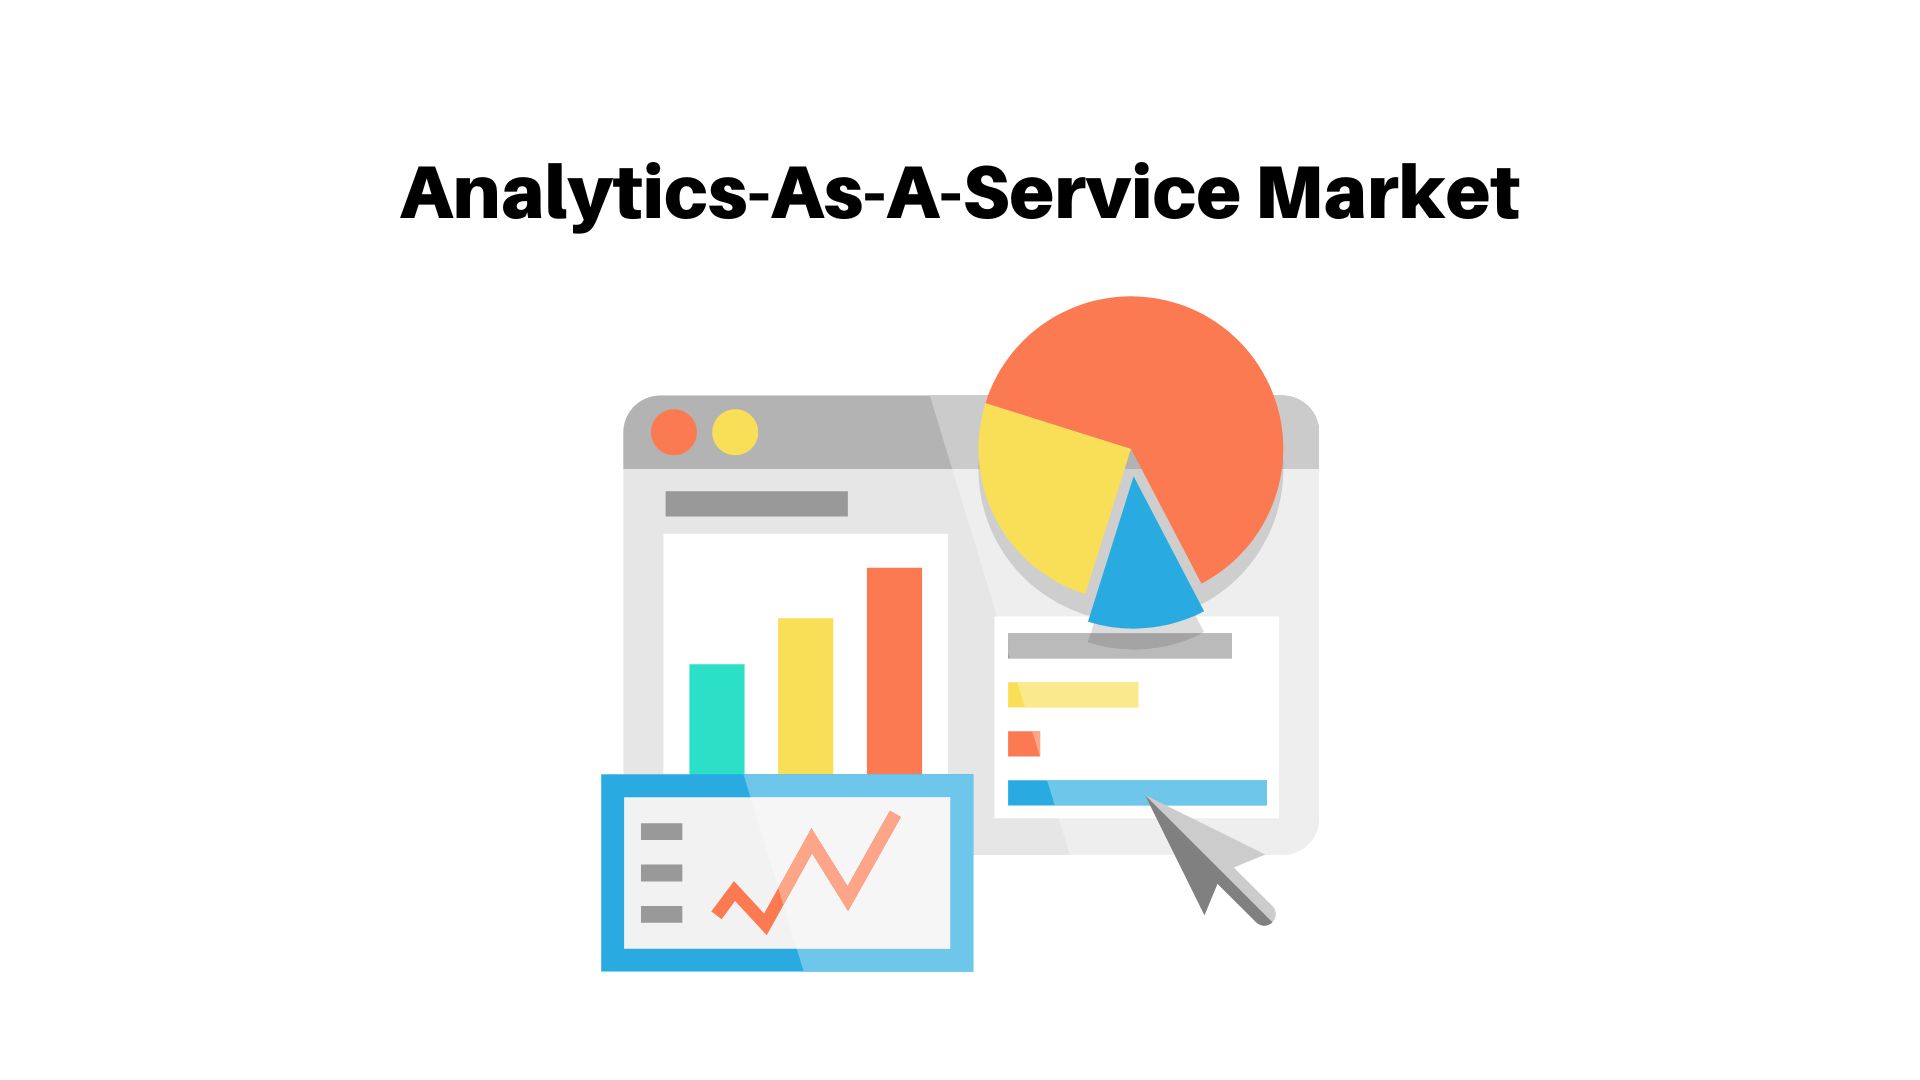 Global Analytics-As-A-Service Market will anticipate around USD 1211.65 Bn by 2033